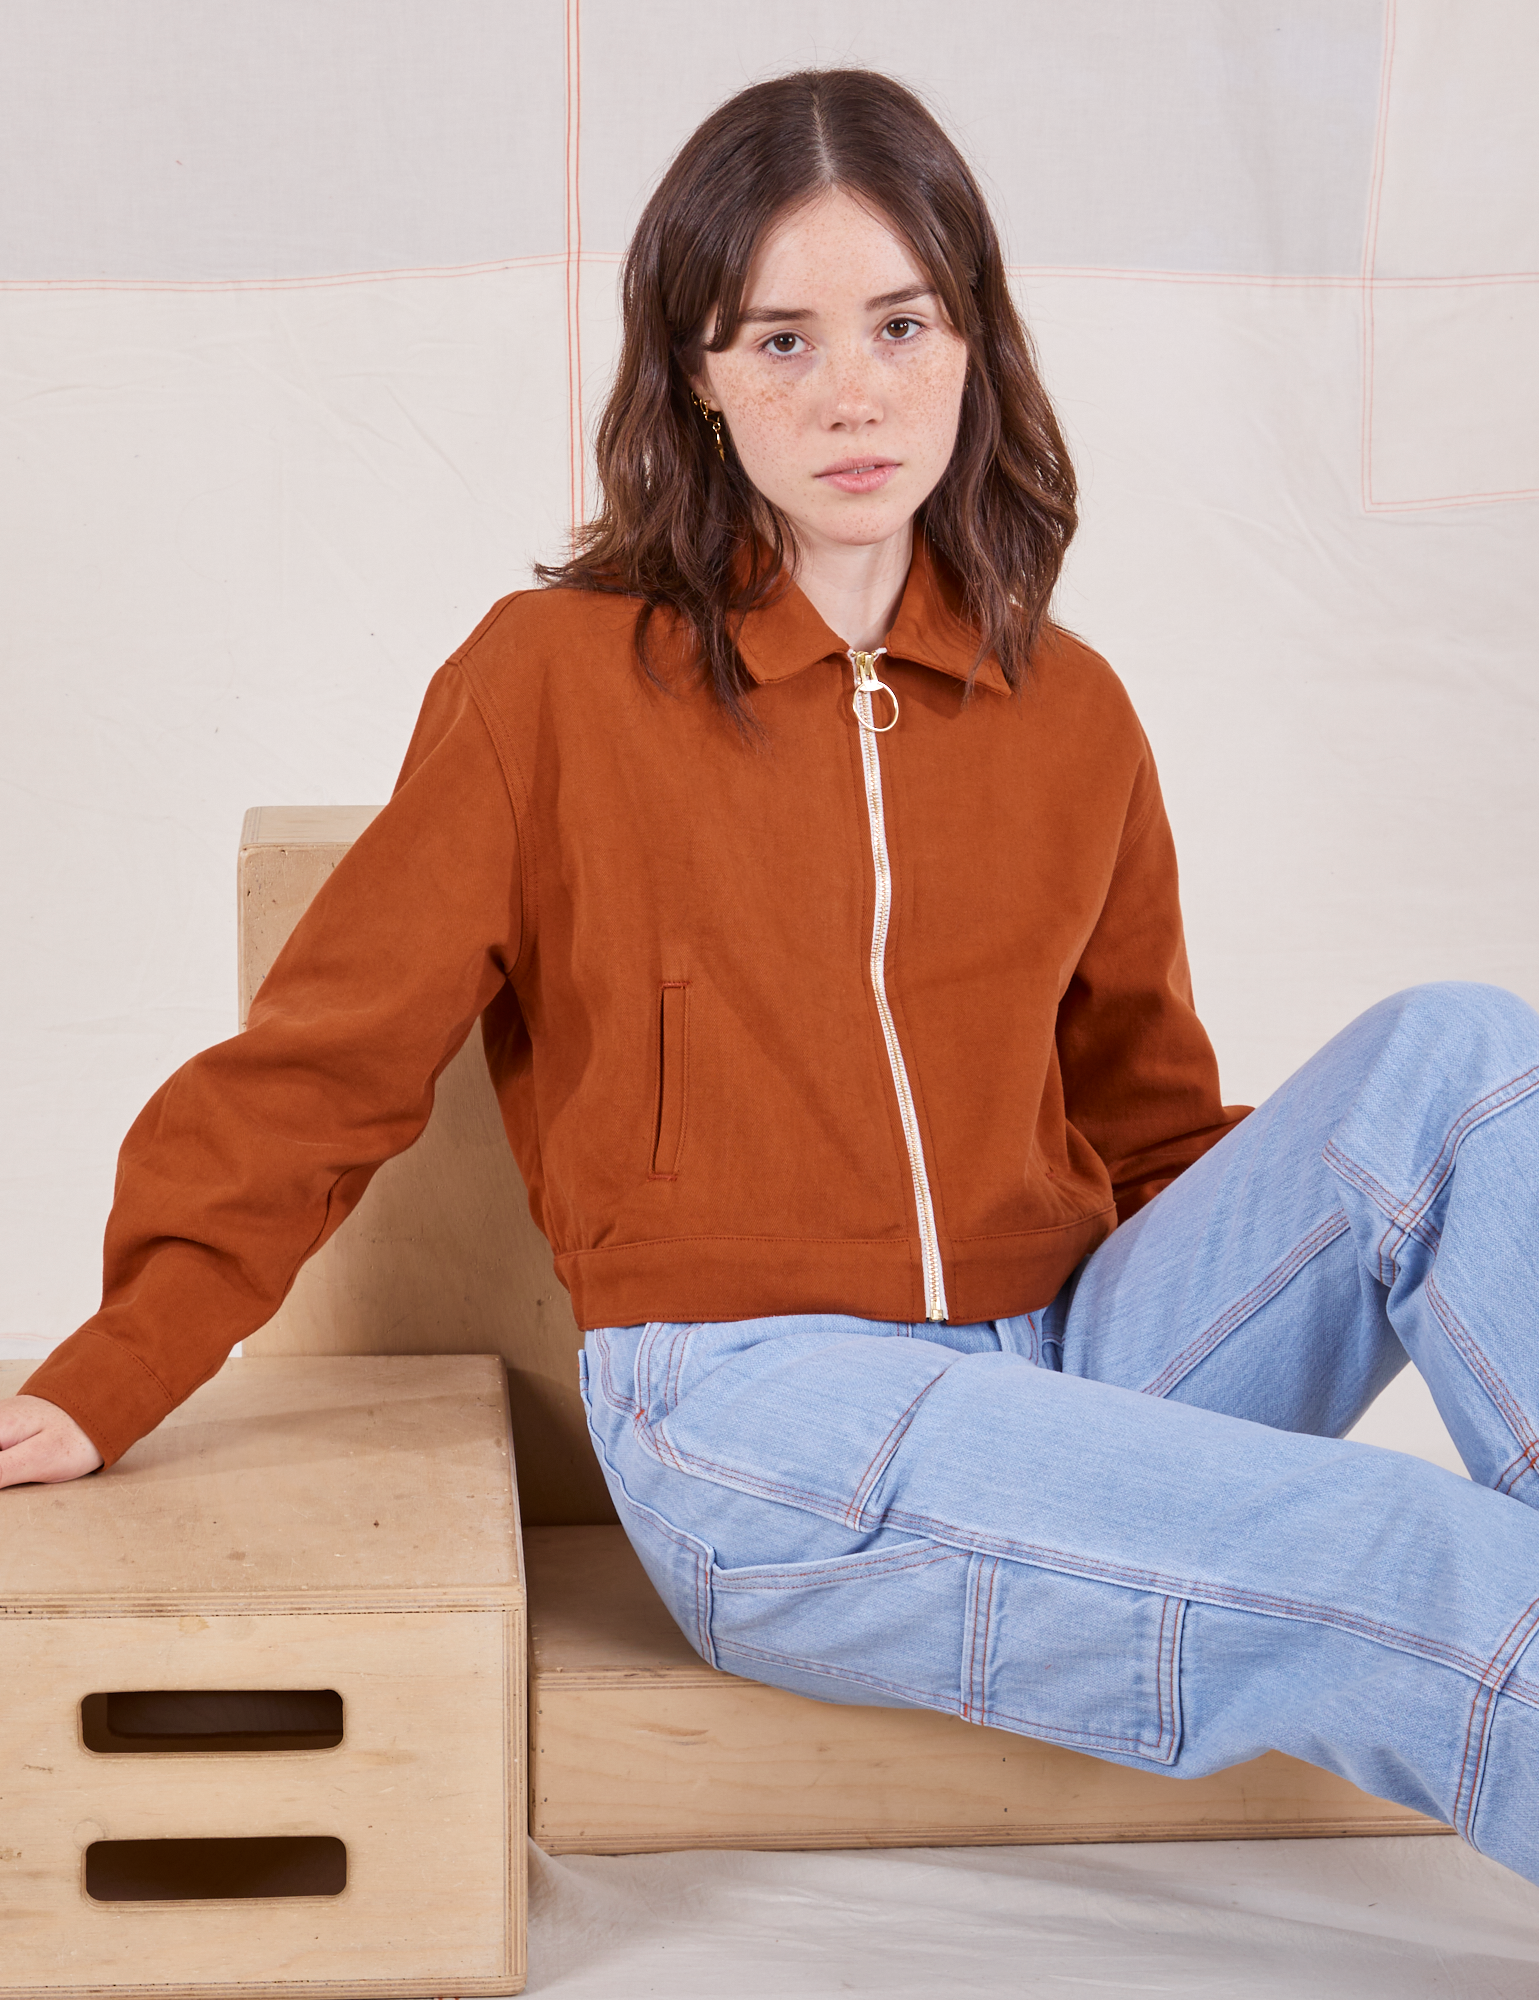 Hana is wearing Ricky Jacket in Burnt Terracotta and light wash Carpenter Jeans